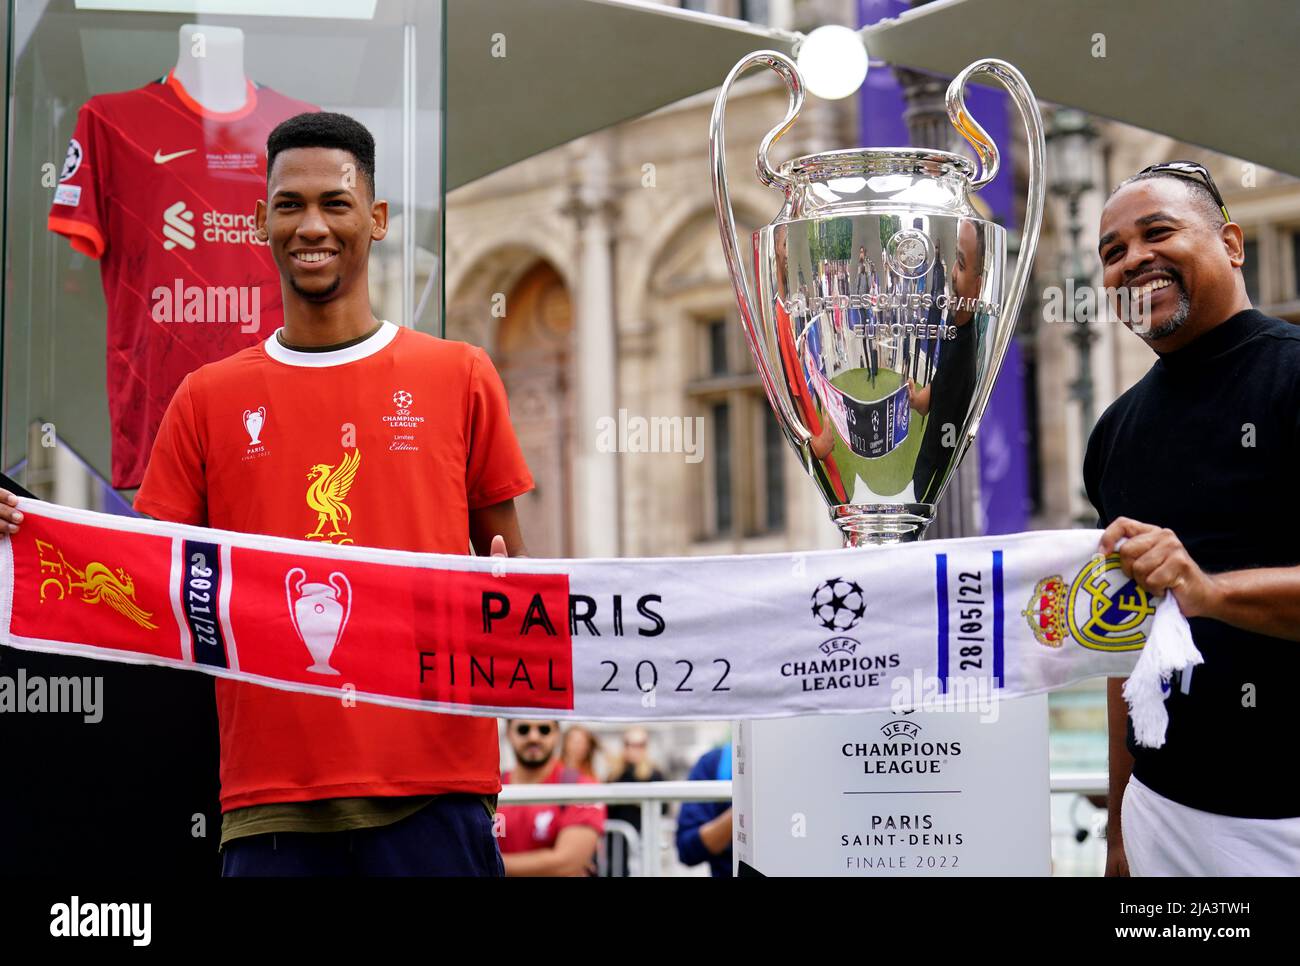 Liverpool fans pose next to the UEFA Champions League trophy at the Trophy Experience at The Place de l'Hotel de Ville in Paris ahead of Saturday's UEFA Champions League Final at the Stade de France, Paris. Picture date: Friday May 27, 2022. Stock Photo